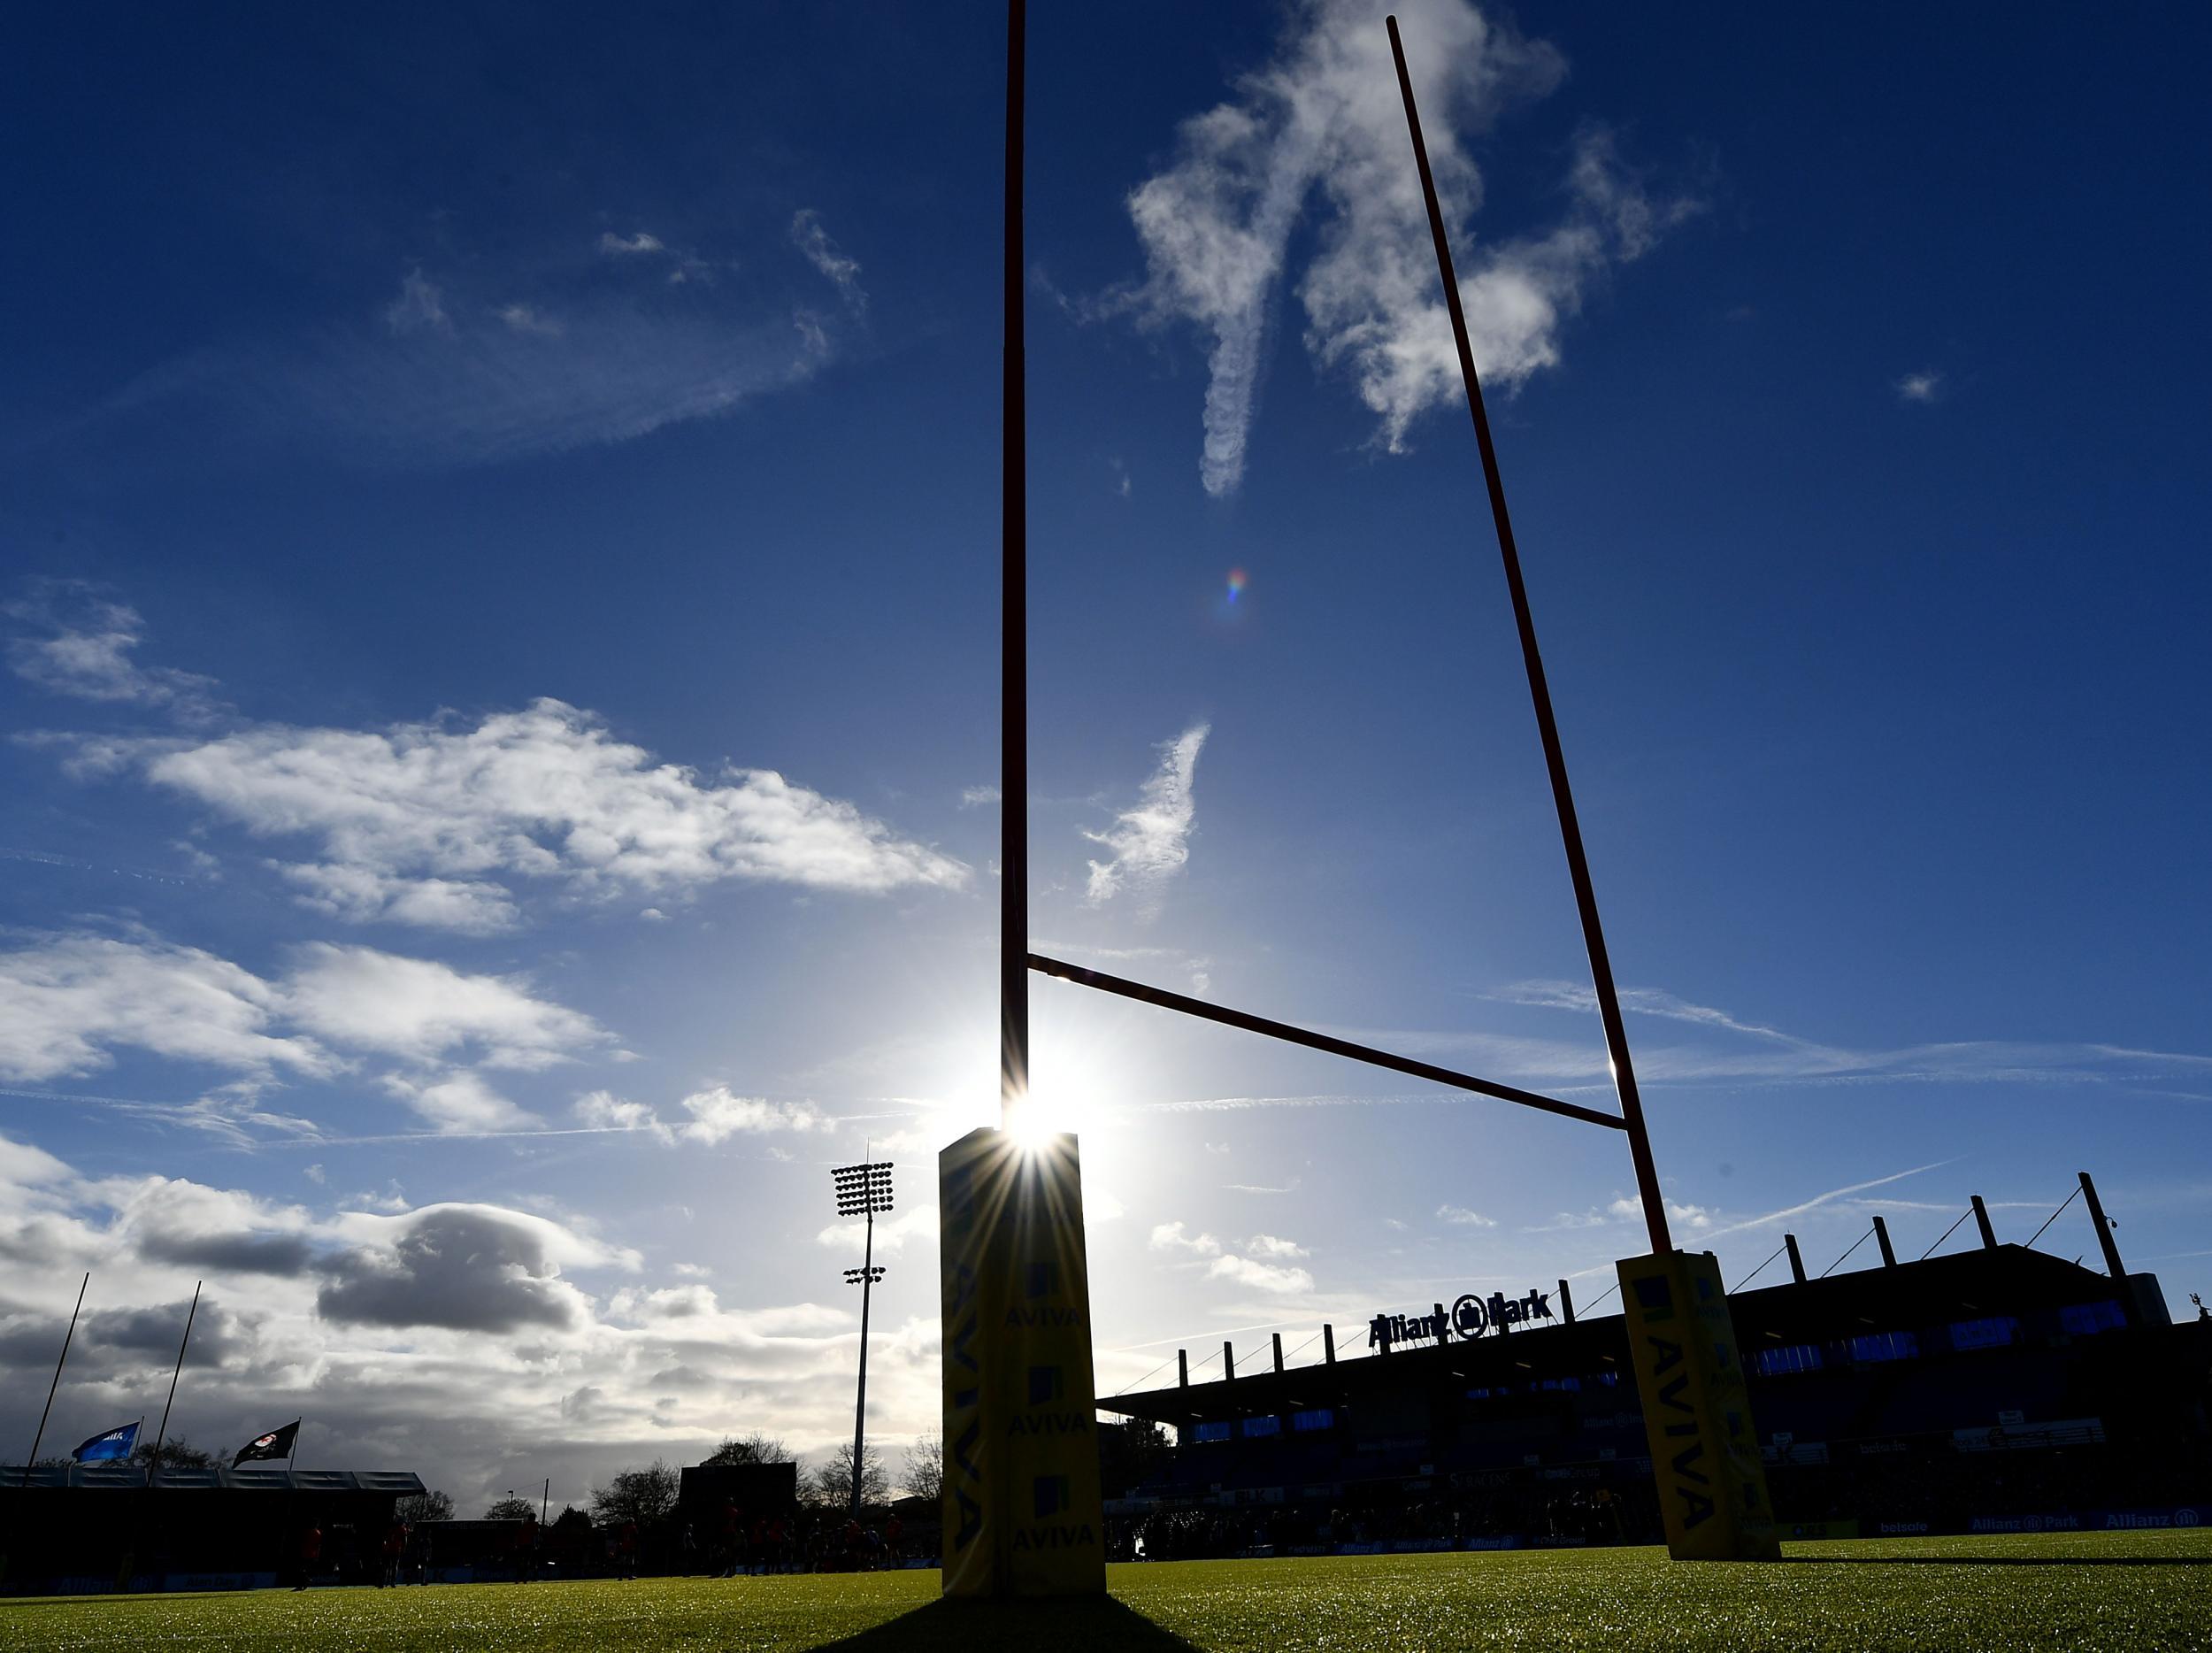 Saracens' clash with Clermont Auvergne has been called off